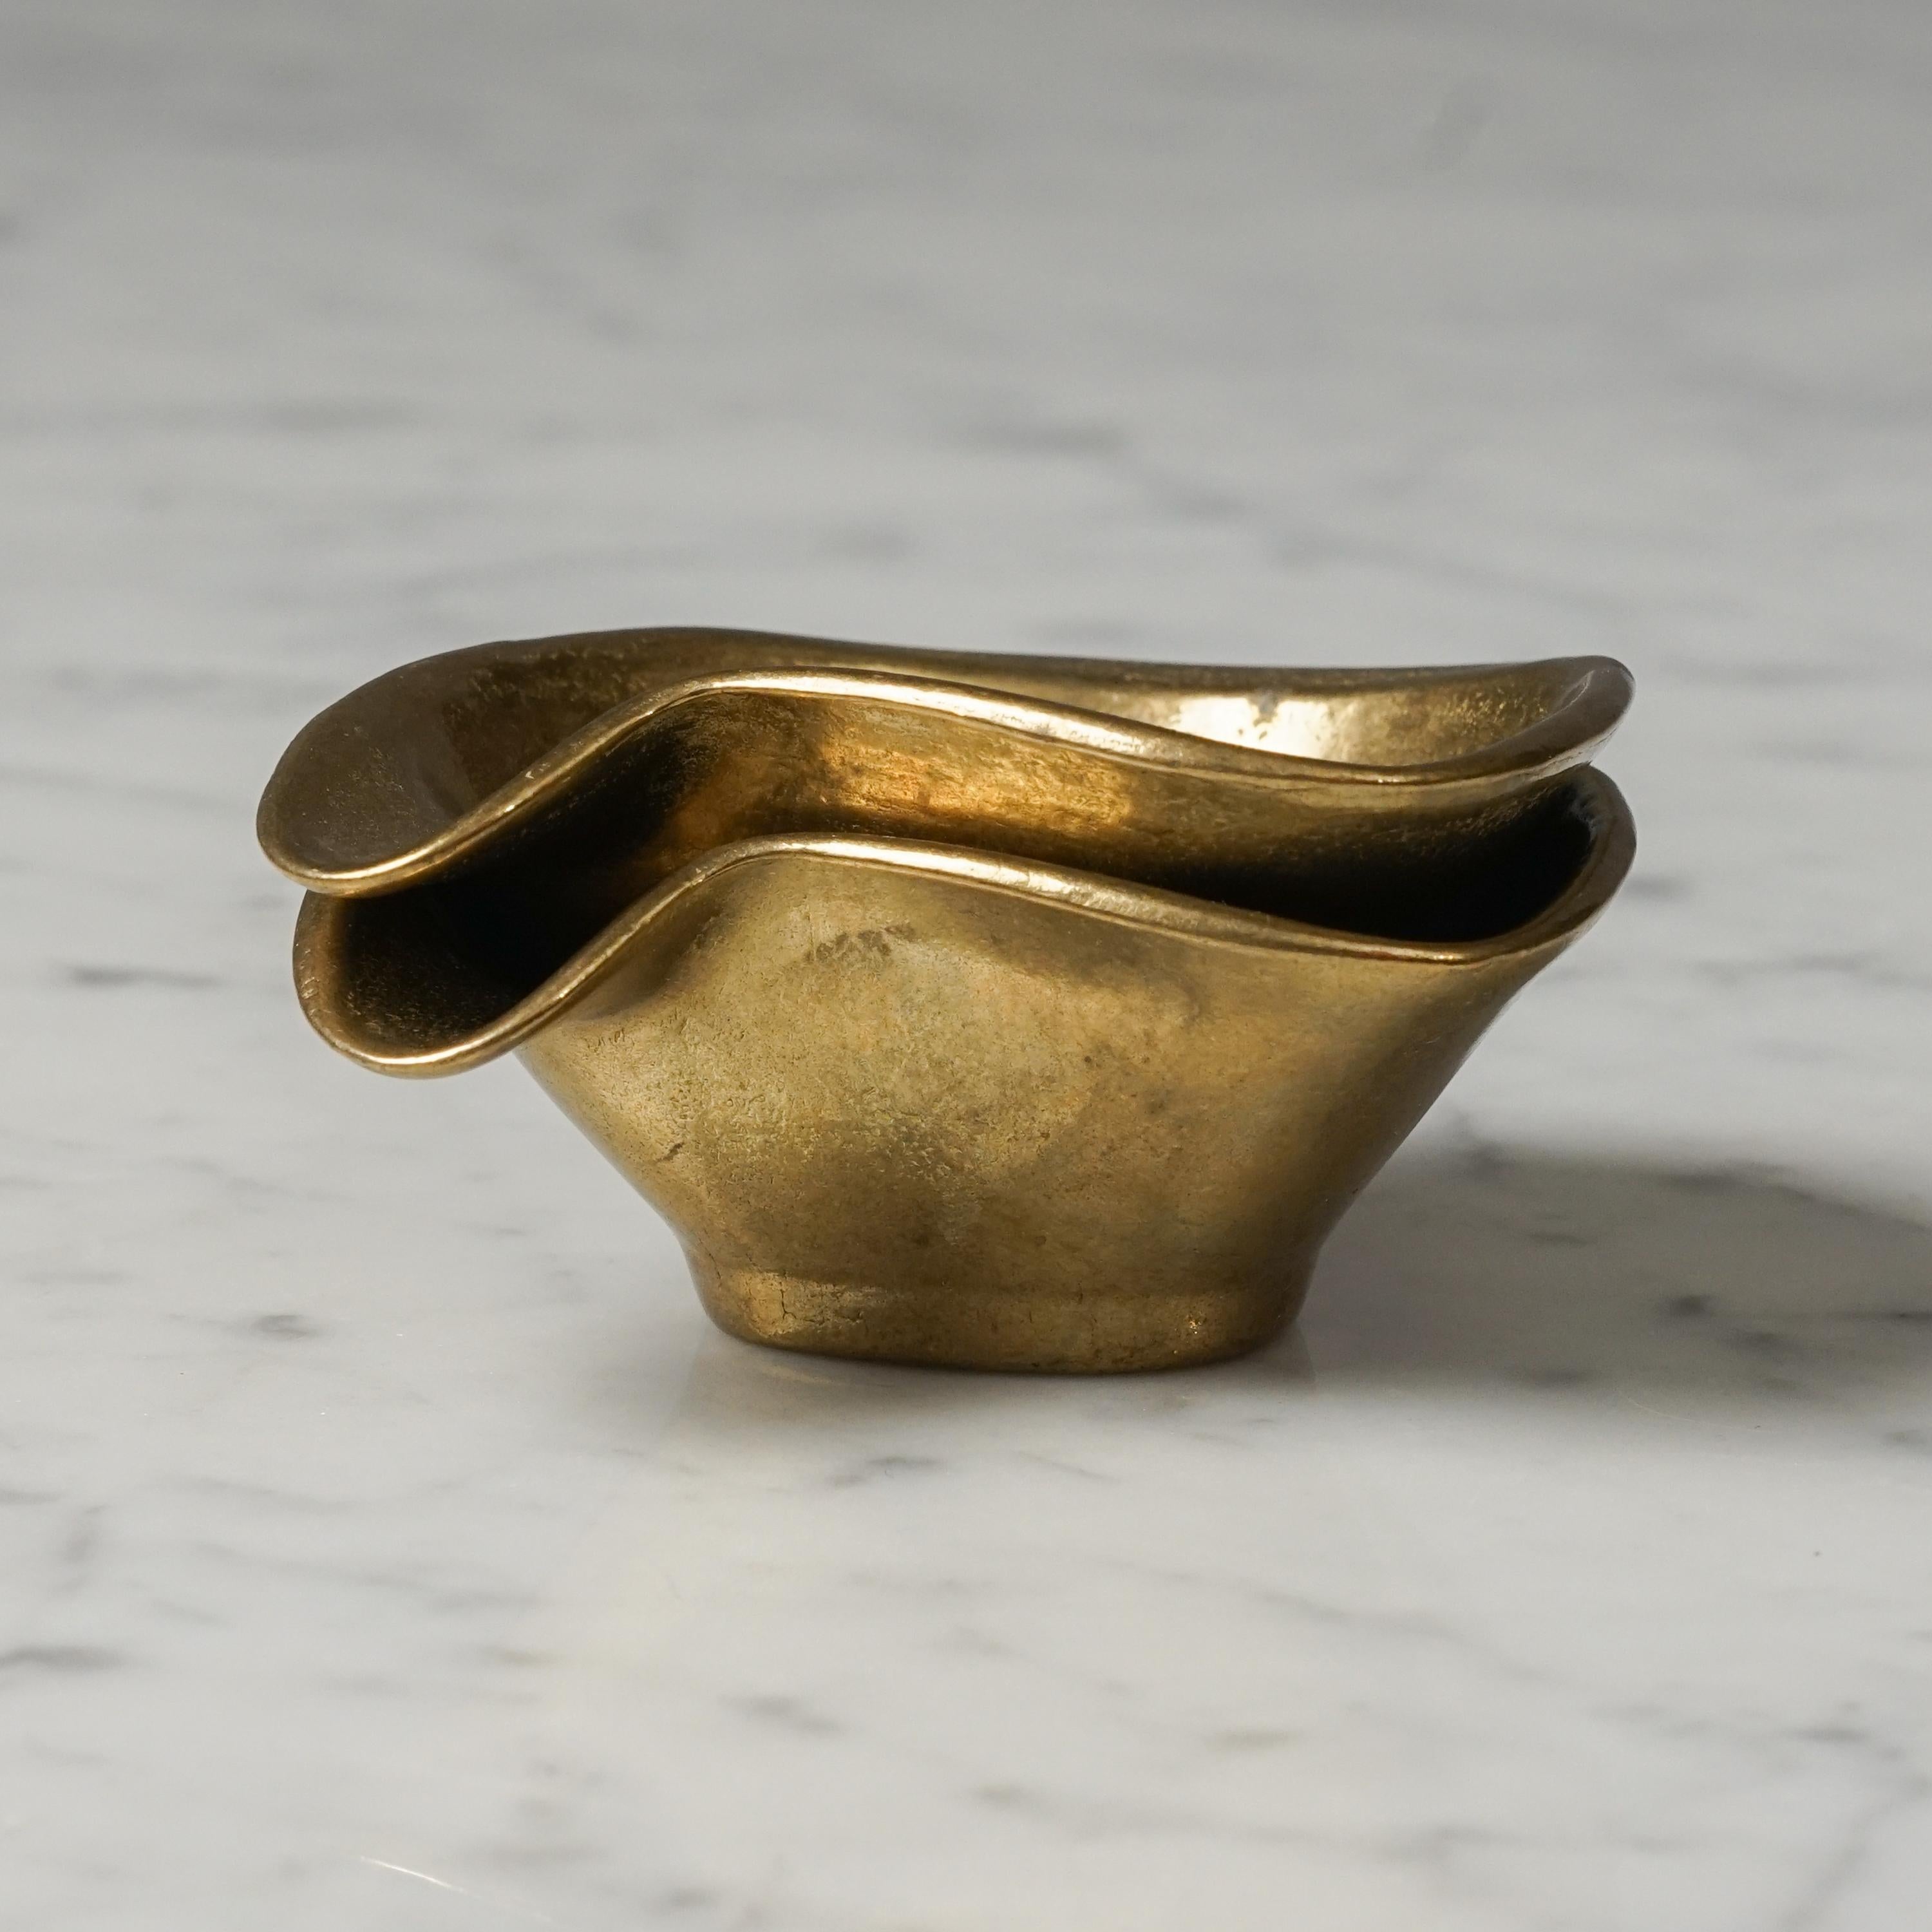 Set of two Scandinavian Modern nesting brass ashtrays from the mid 1900s. Solid brass. Stamped on the bottoms. Good vintage condition, minor wear consistent with age and use.